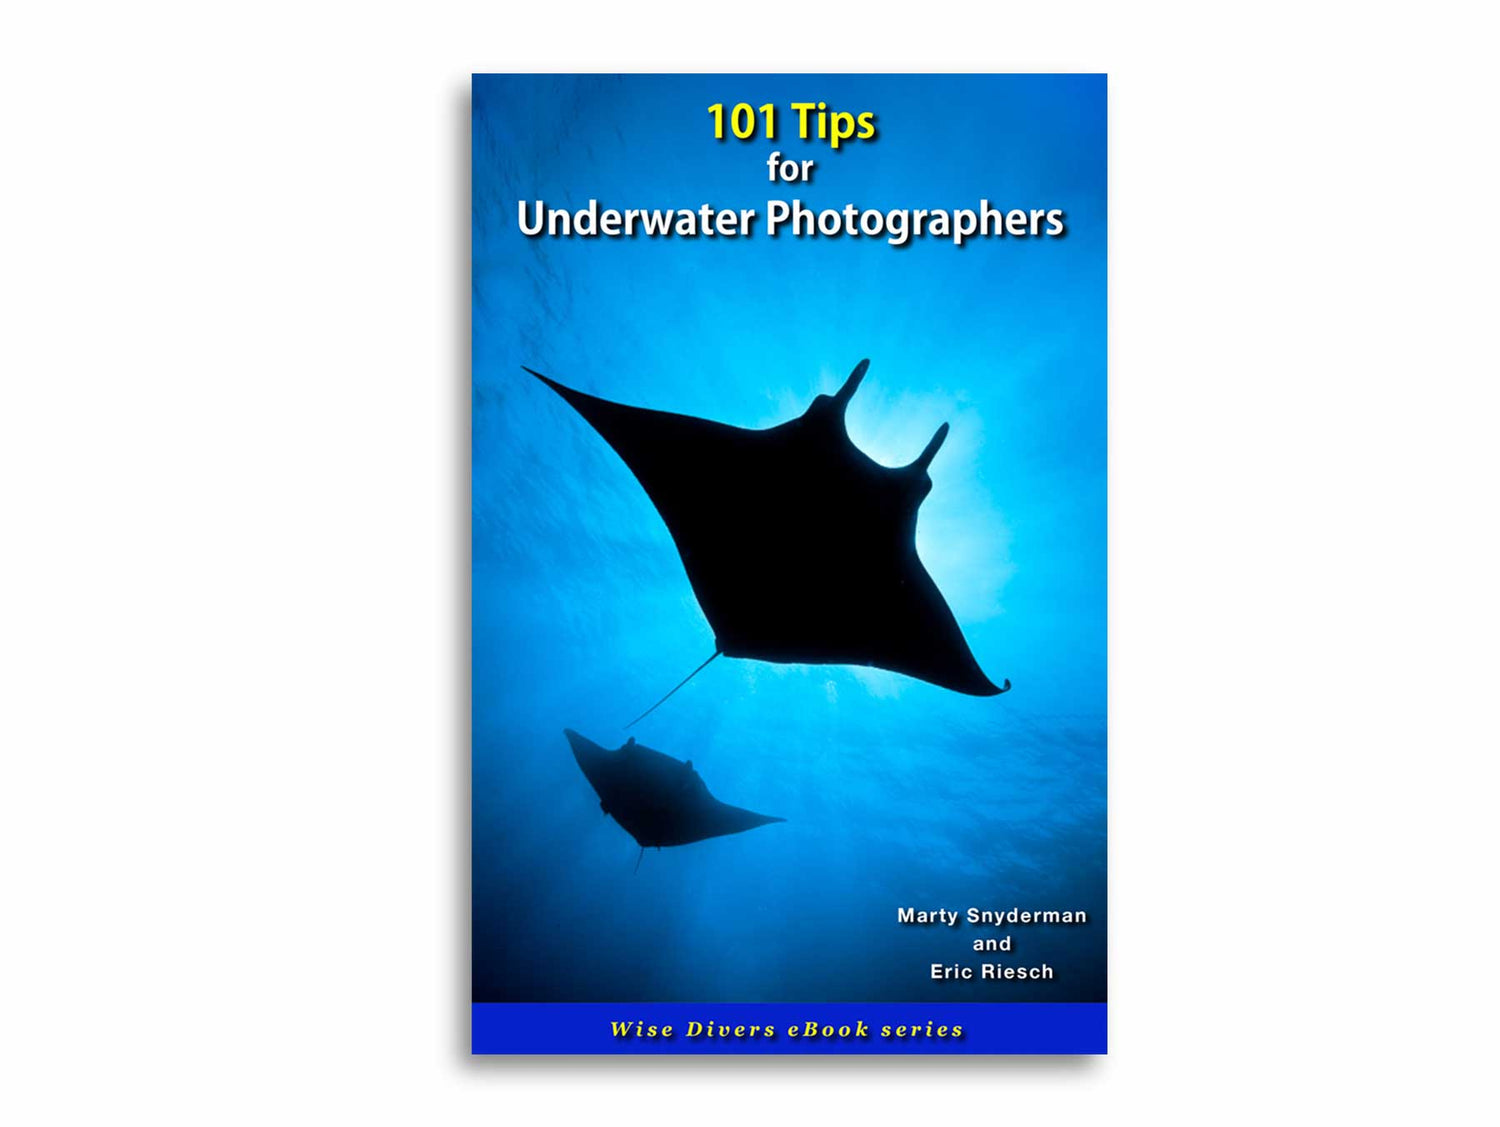 Book Review: 101 Tips for Underwater Photographers